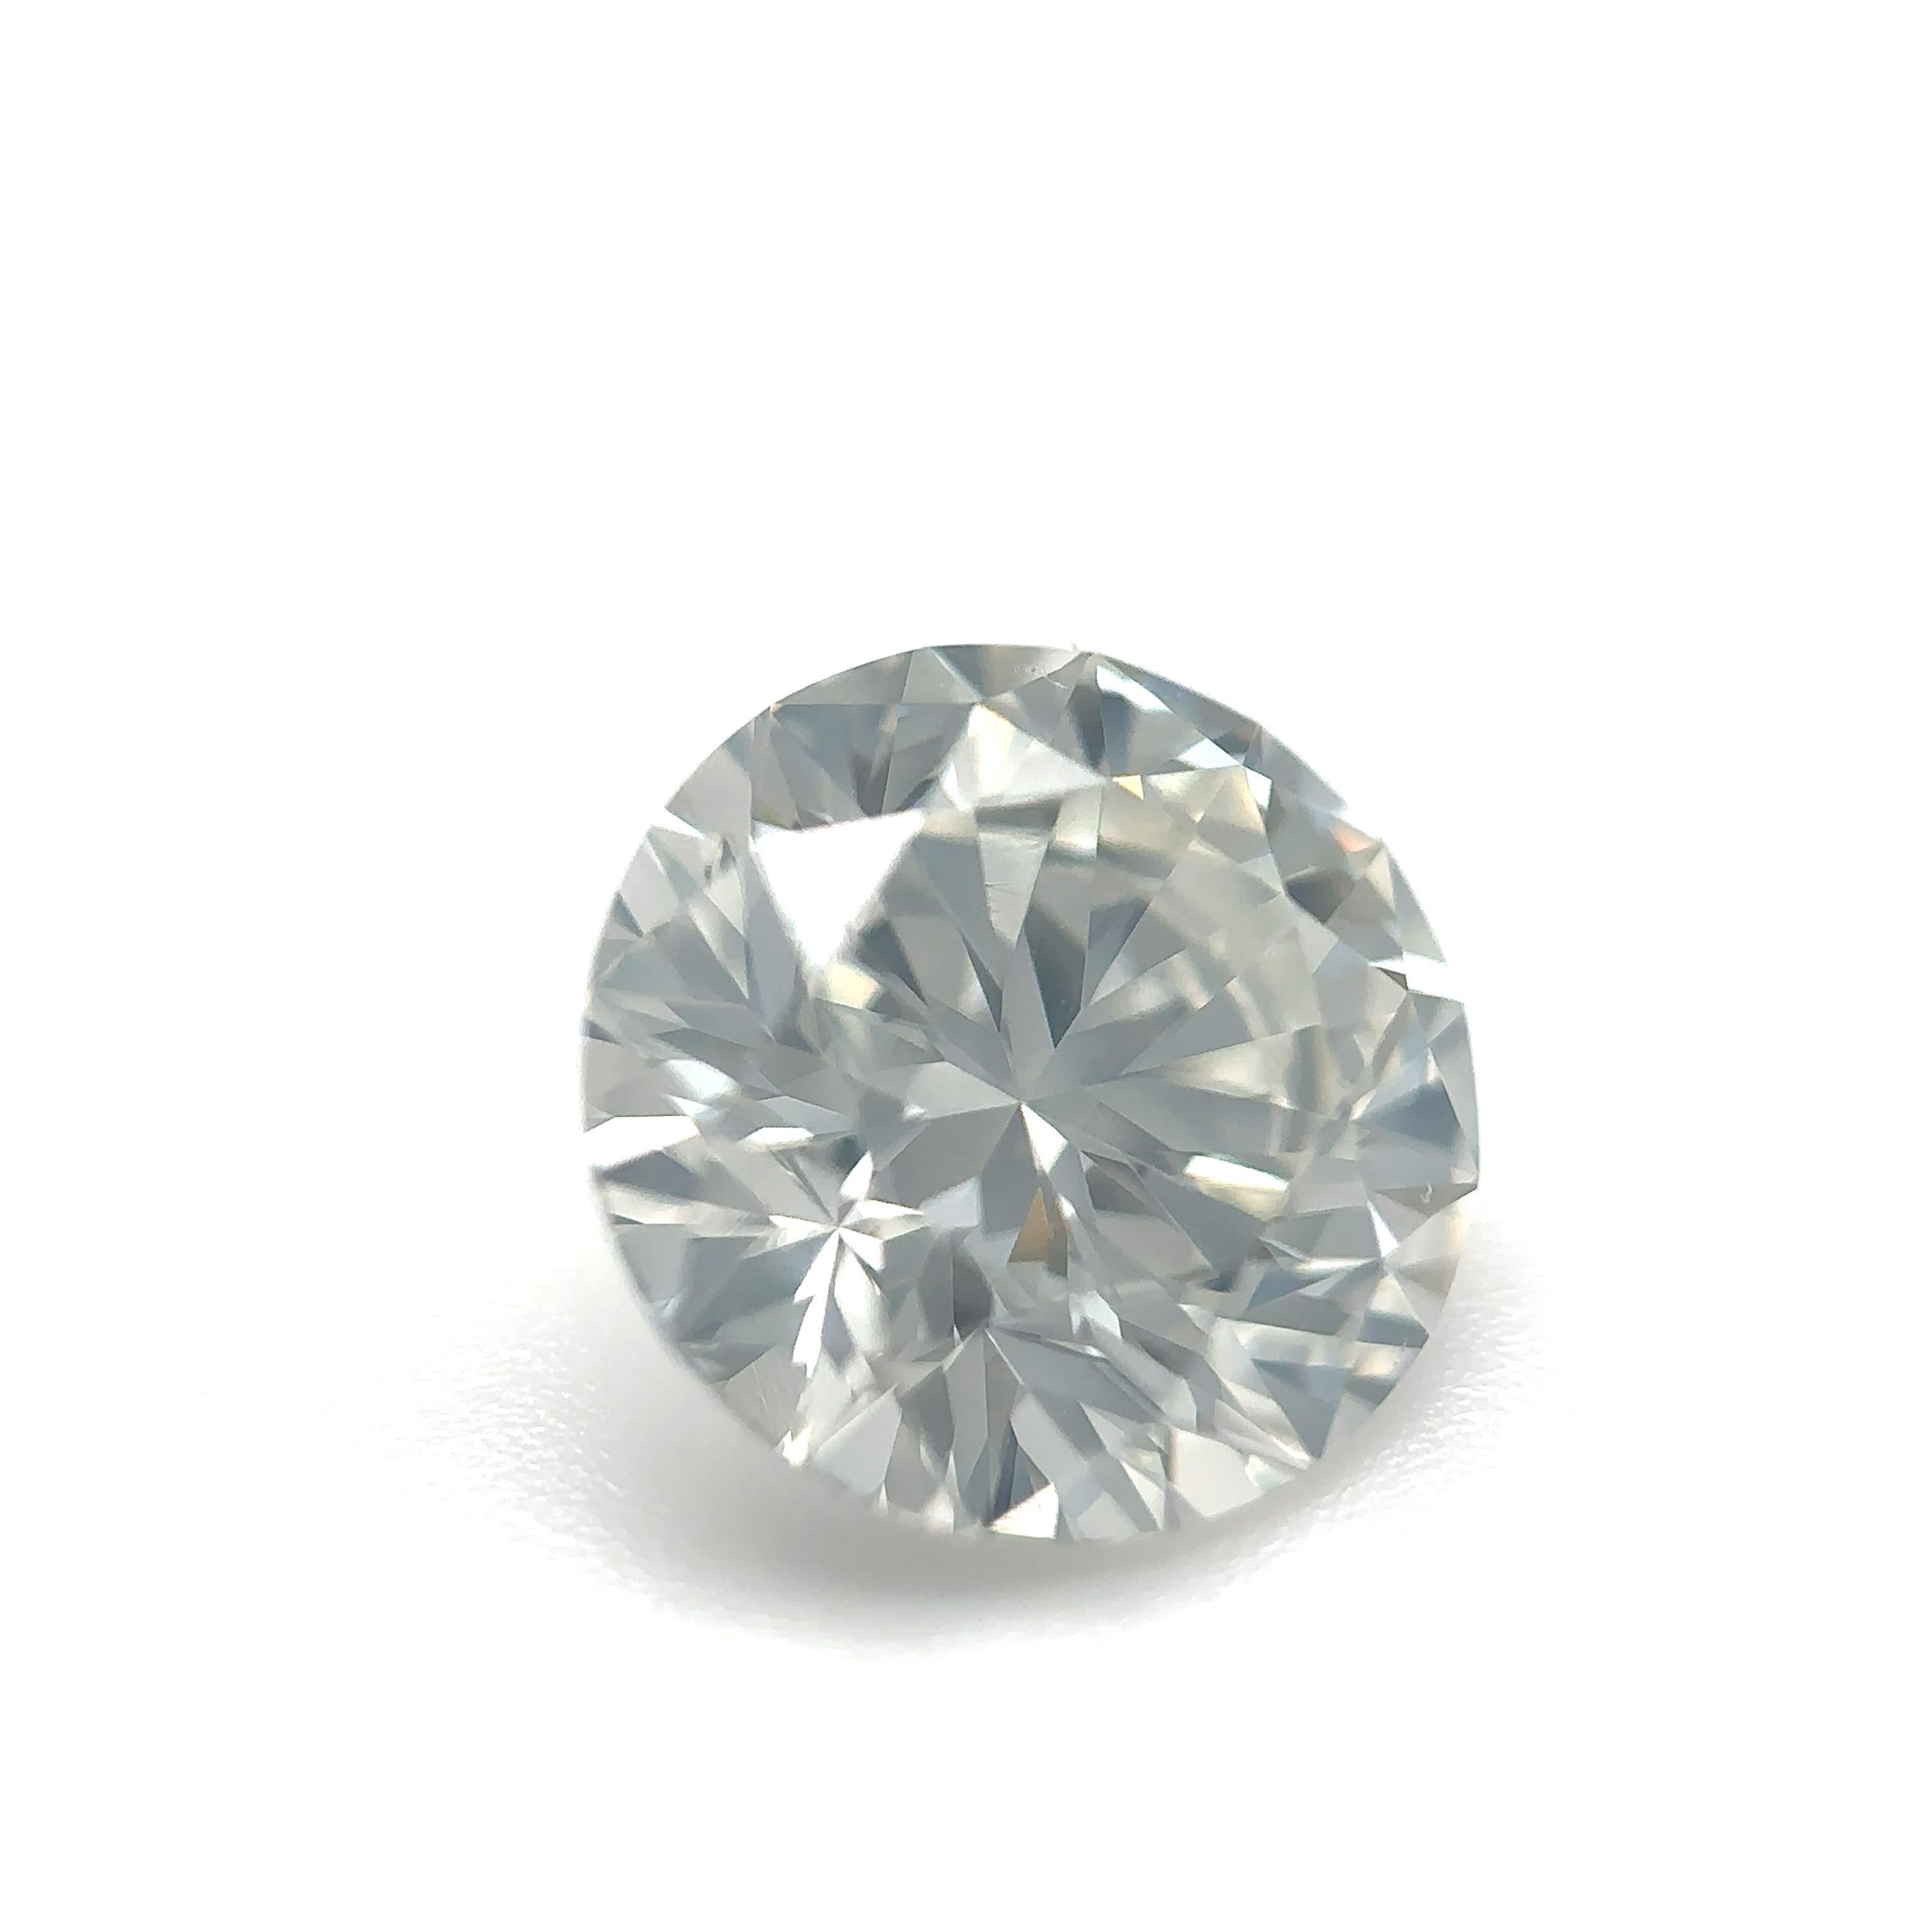 GIA Certified 1.57 Carat Round Brilliant Natural Diamond Loose Stone (Customization Option)

Color: H
Clarity: SI1

Ideal for engagement rings, wedding bands, diamond necklaces and diamond earrings. Get in touch with us to customise your jewellery!